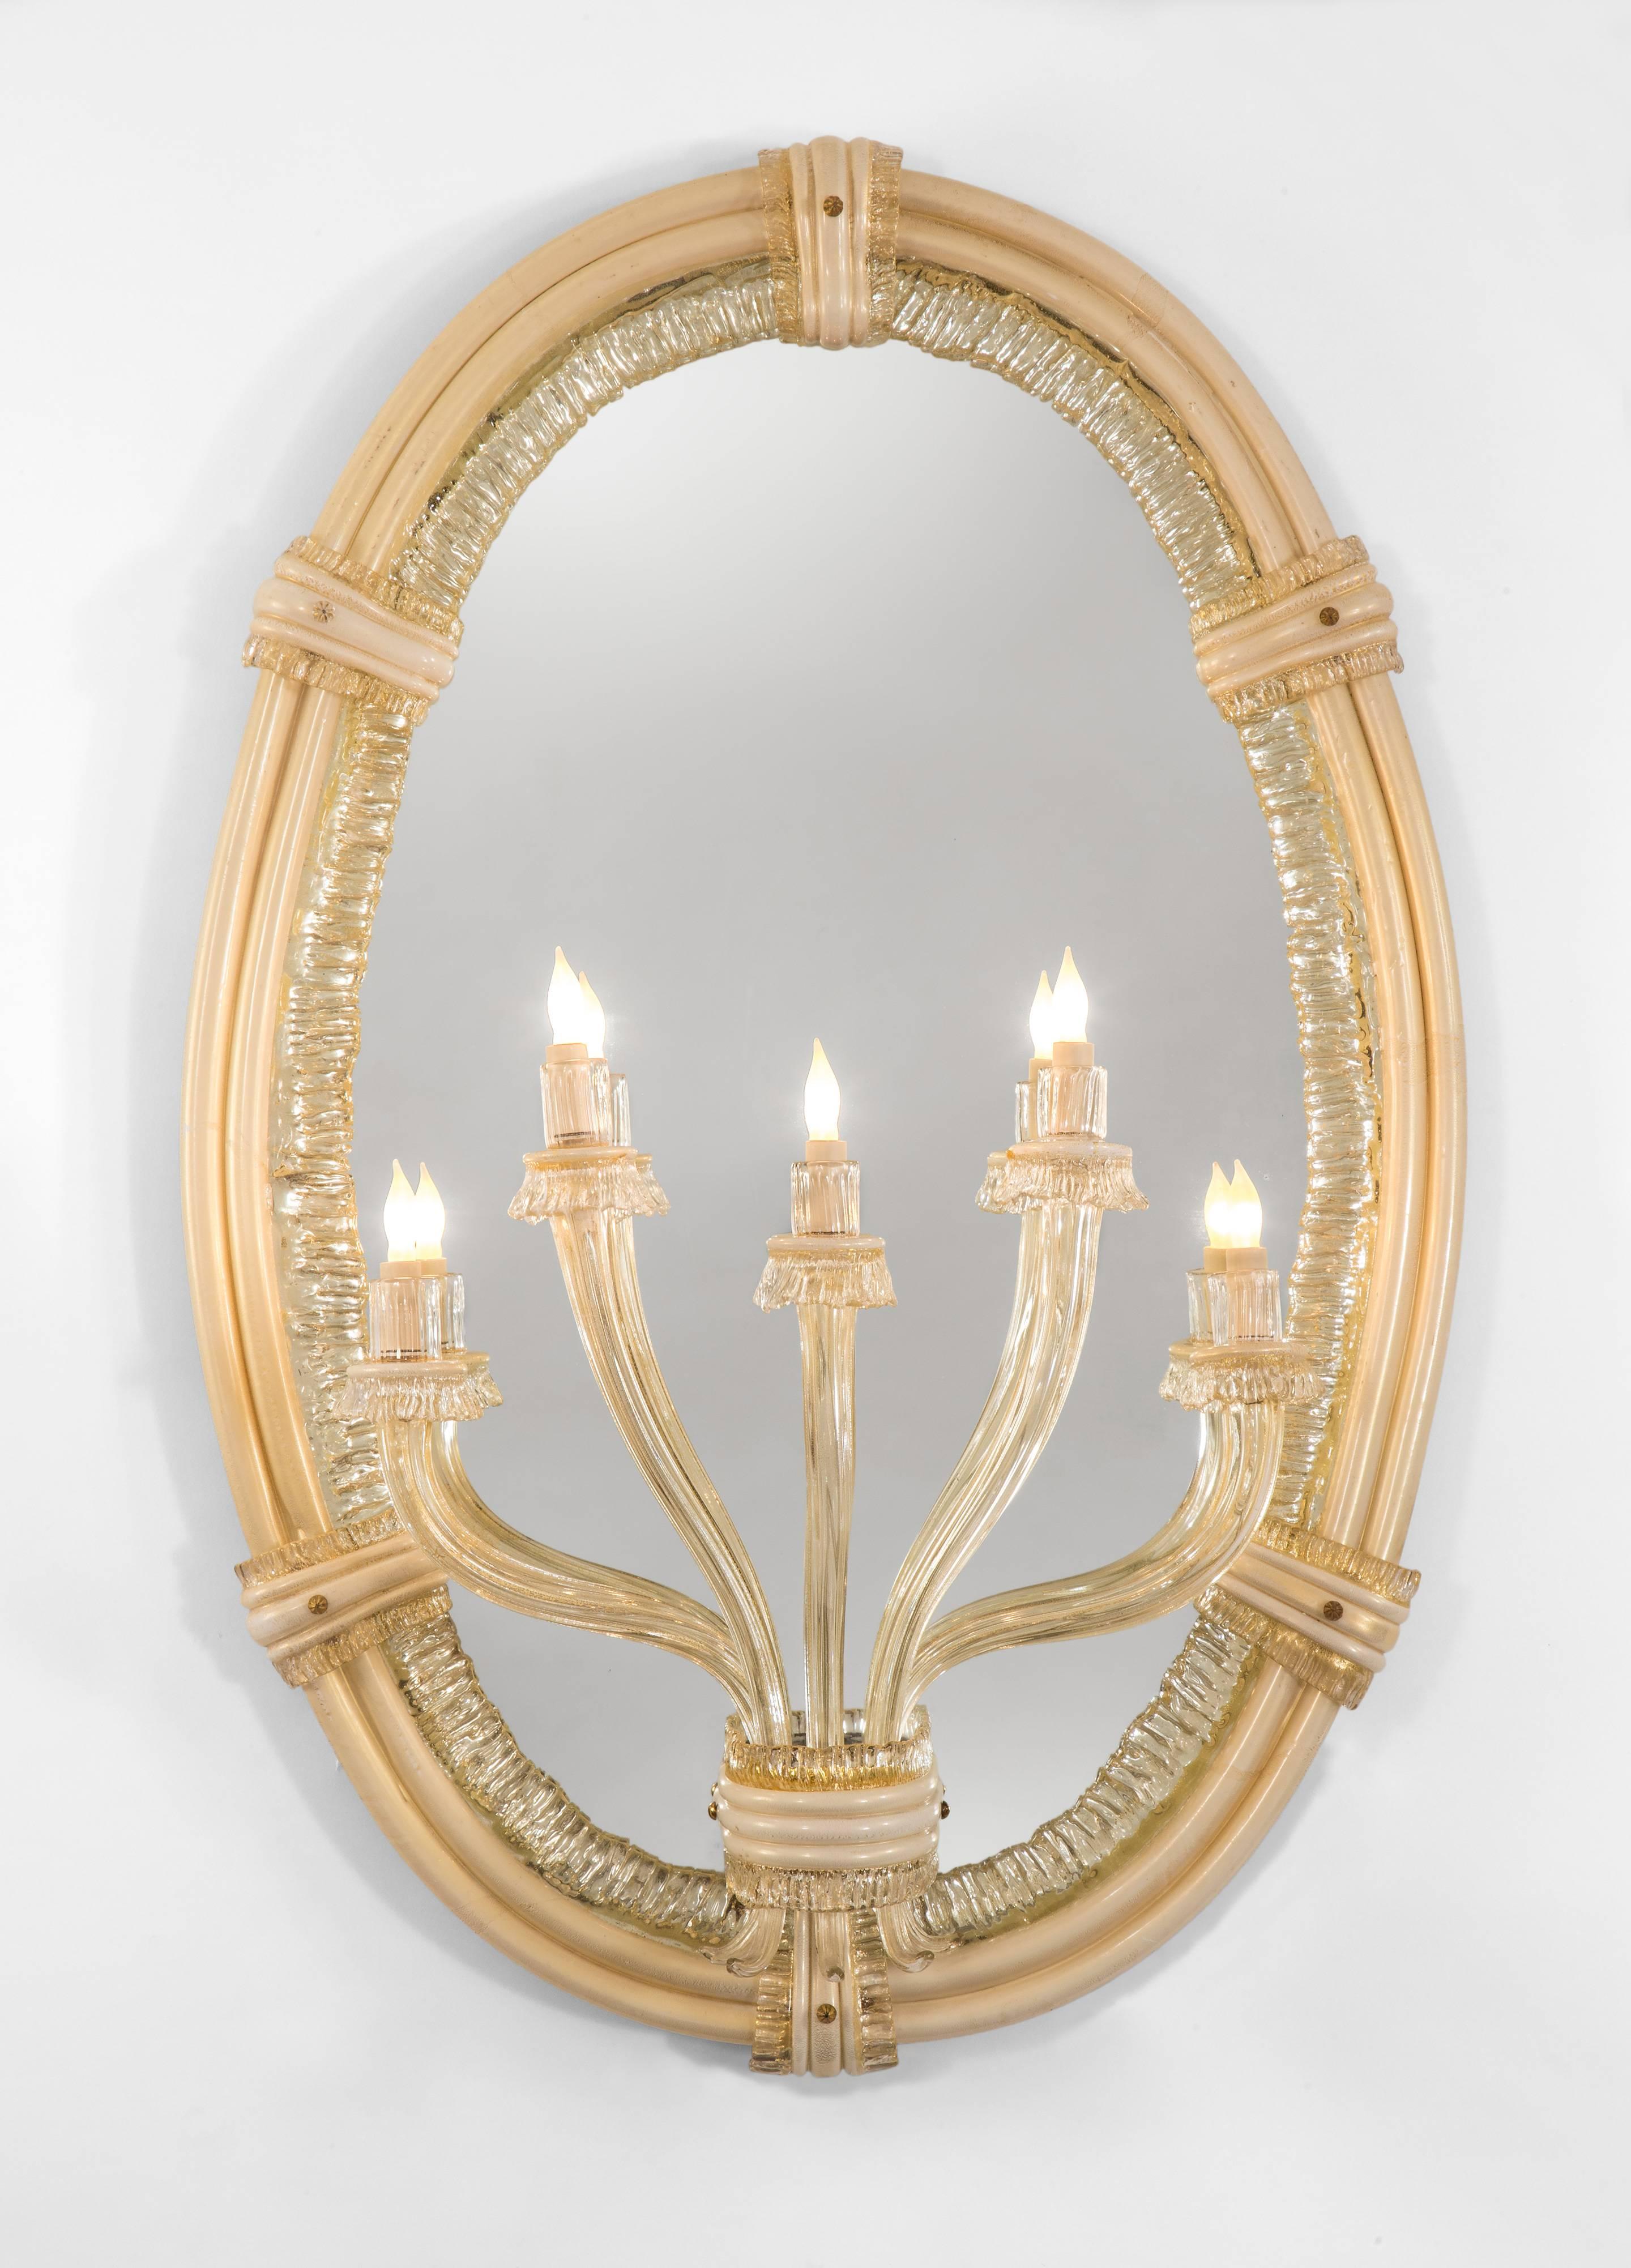 A magnificent composition of gorgeous handblown glass of a subtle cream and clear glass. With an impressive provenance. Each oval mirror plate within a lattimo and colorless ribbon glass frame, gold inclusions throughout, the oval frame fastened